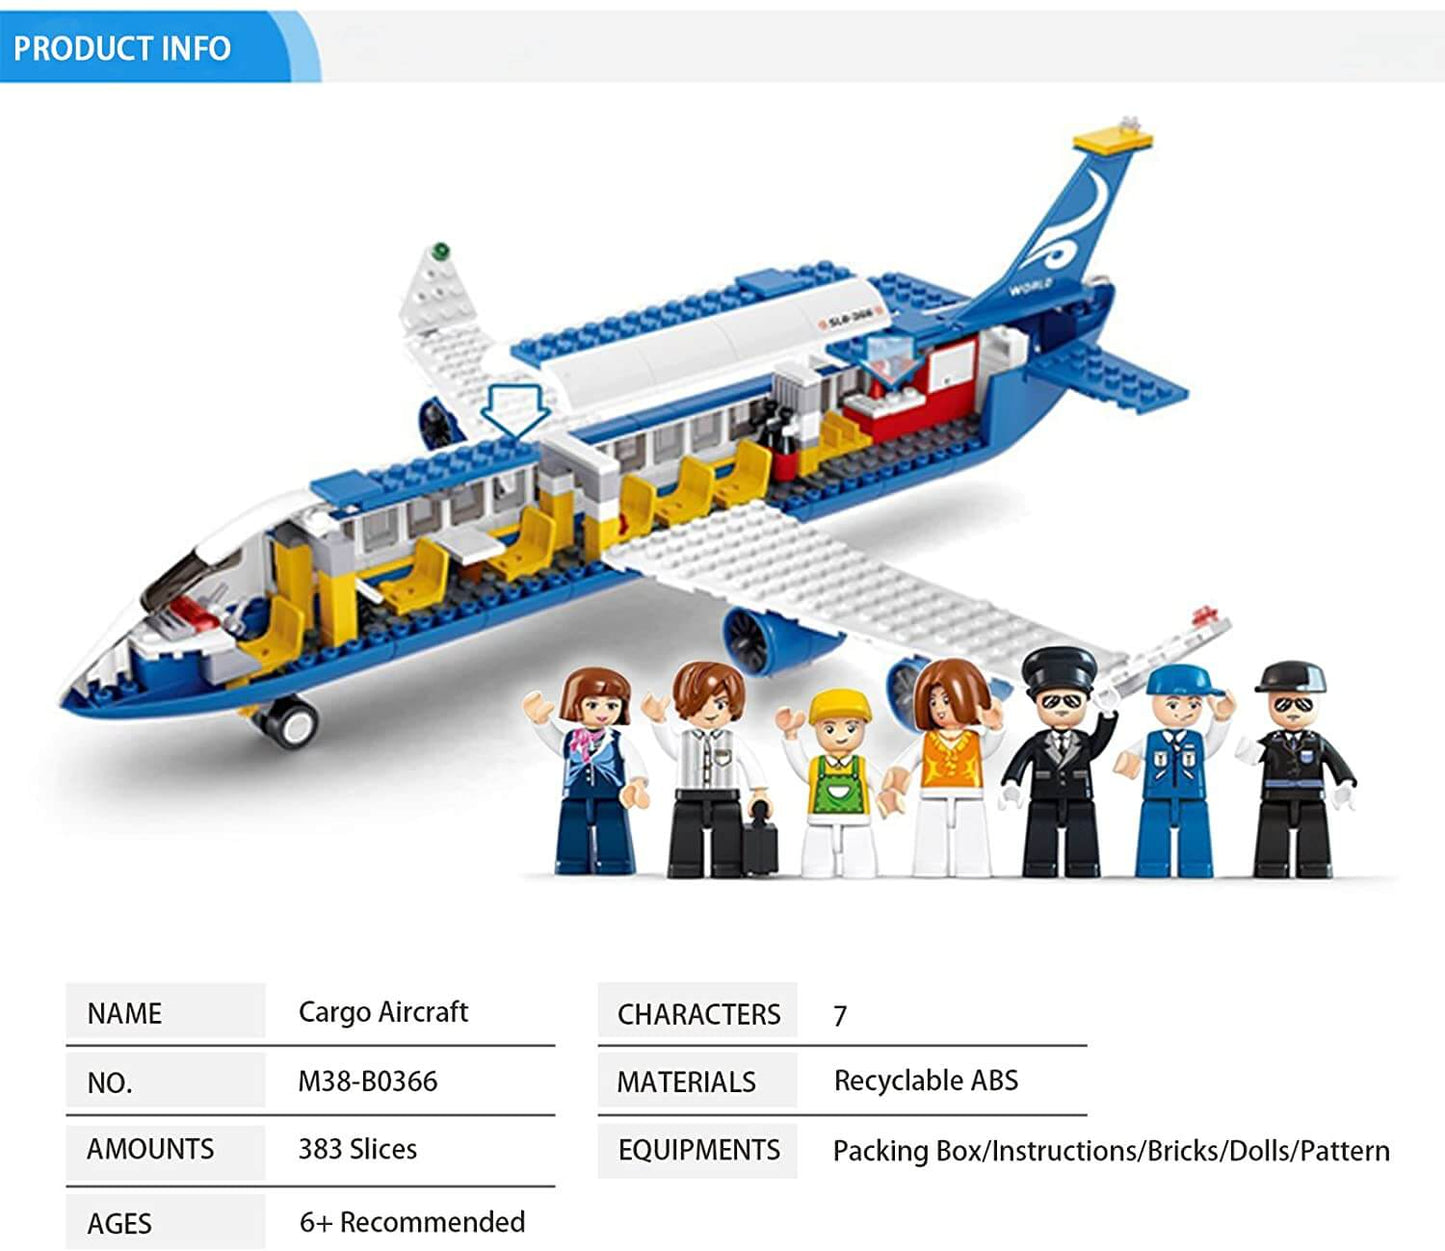 Airport Toy Set - Airplane Toy For Kids